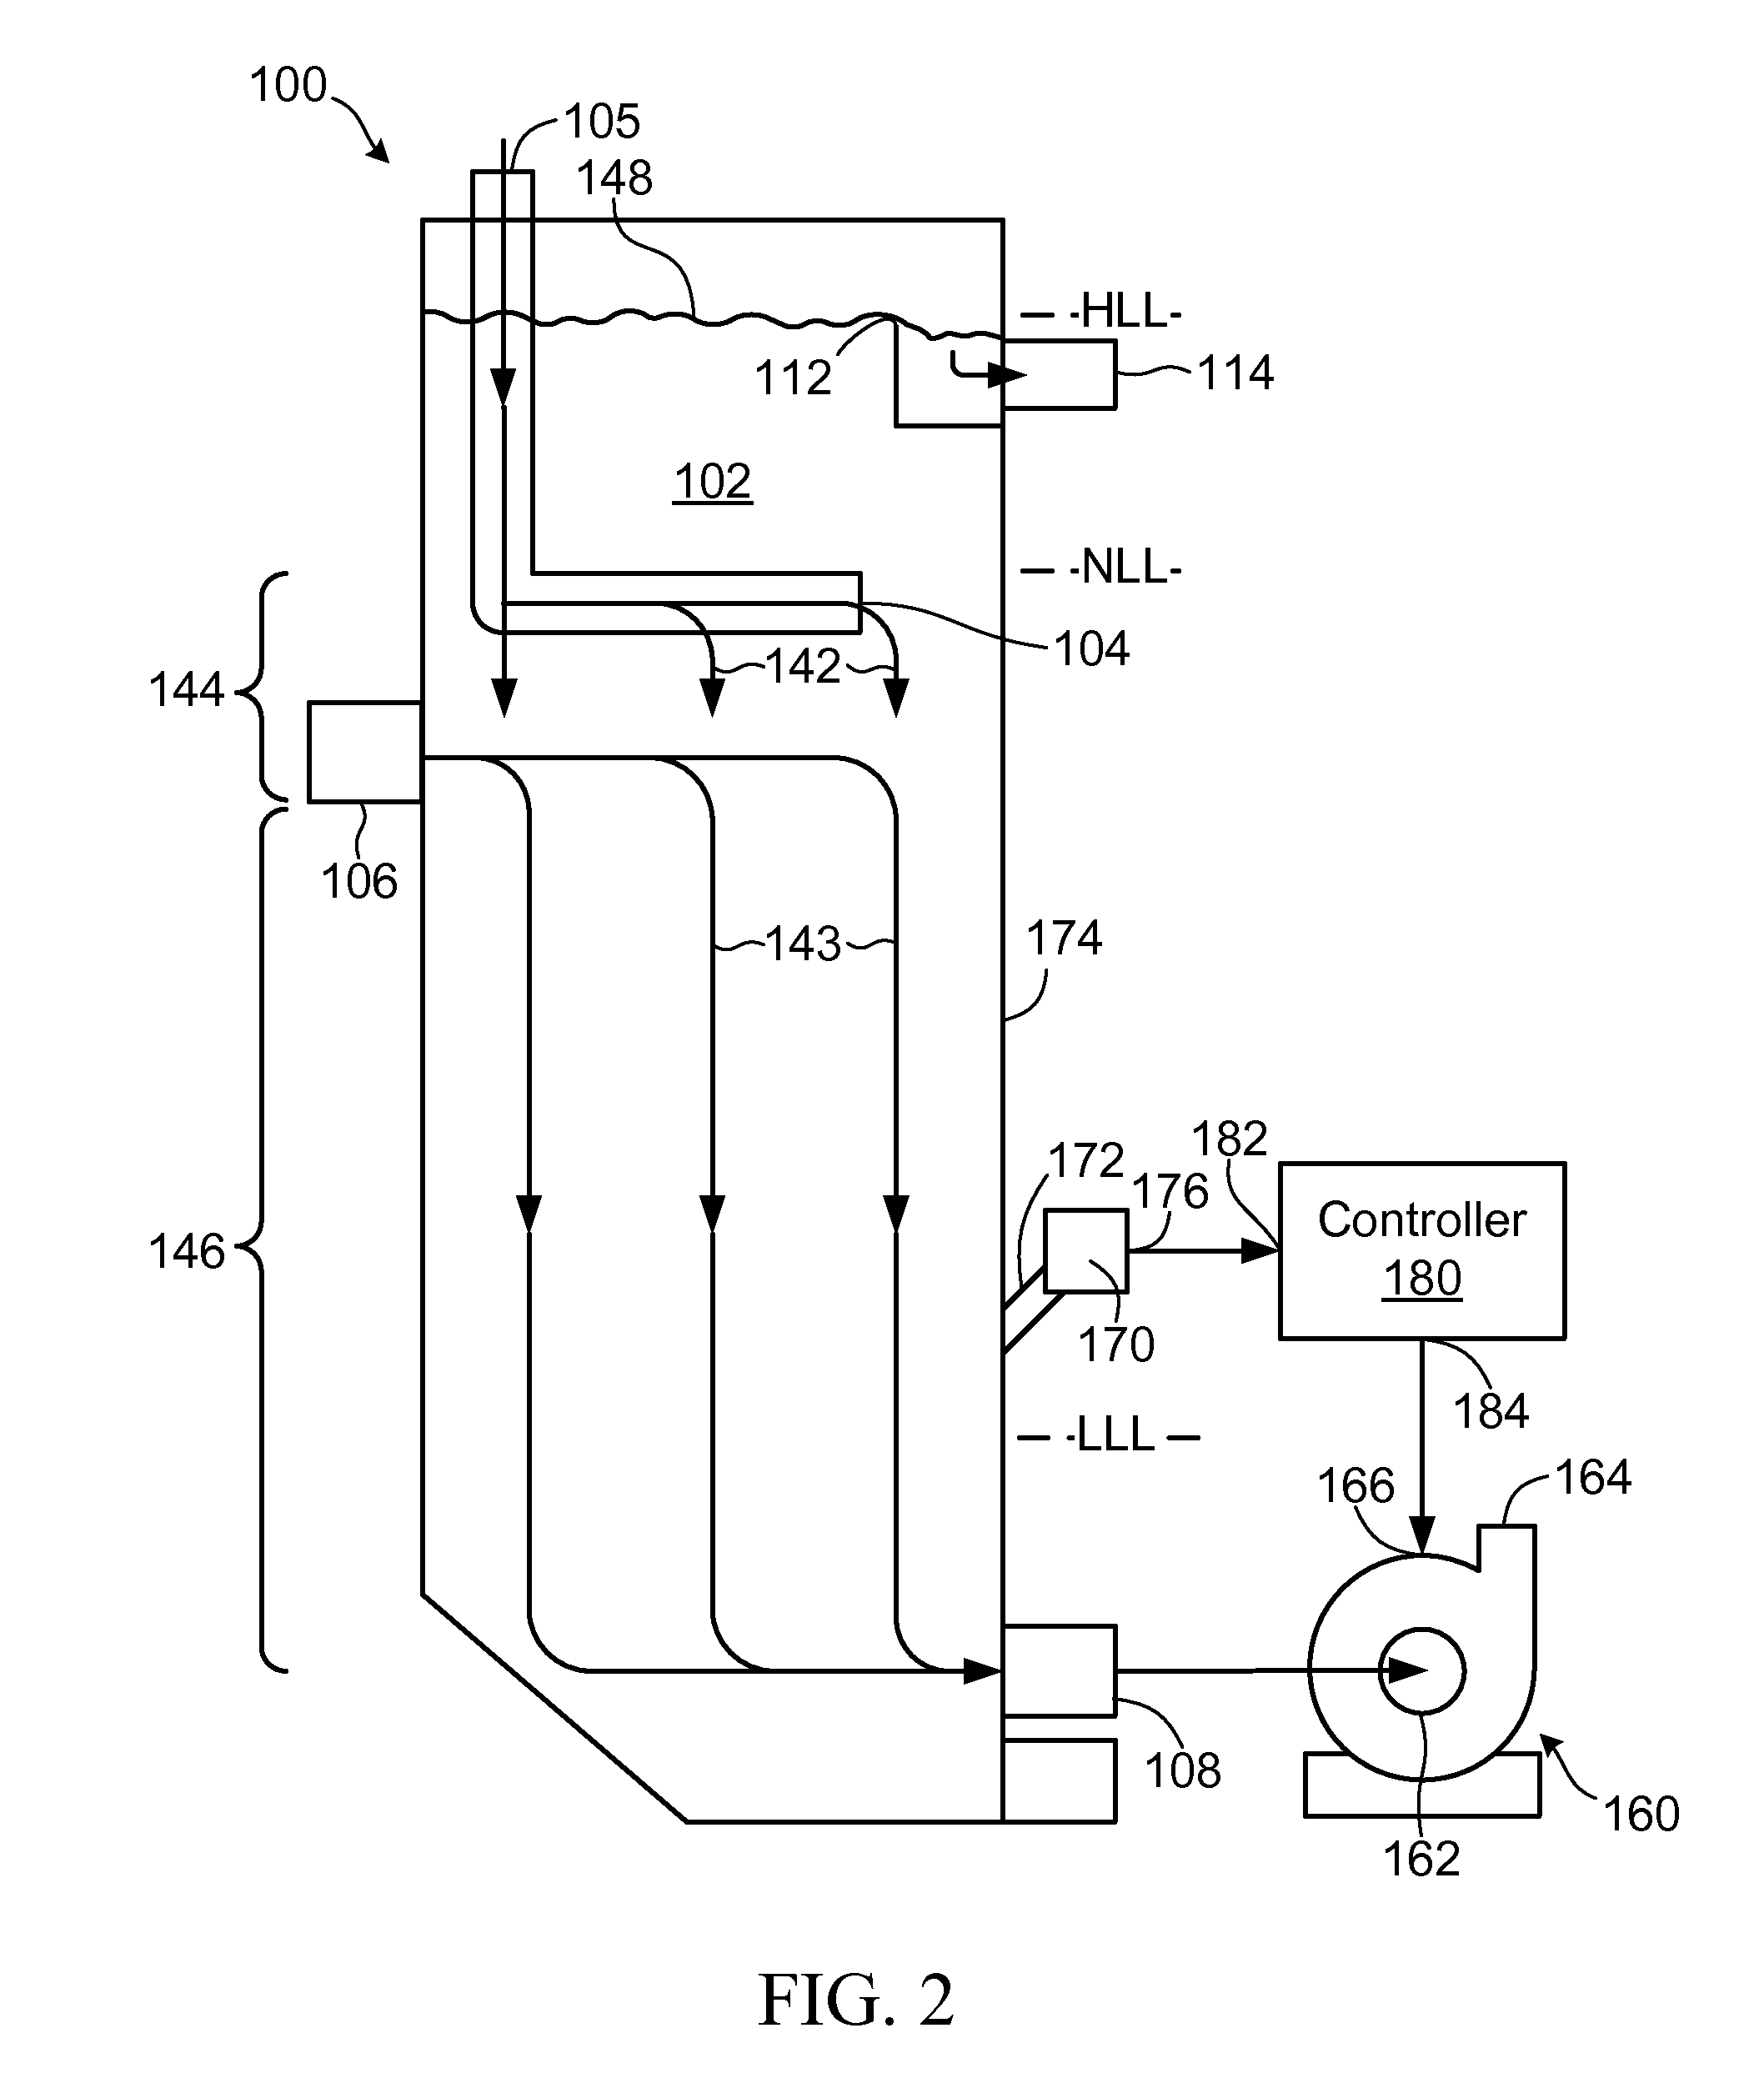 Apparatus and method for regulating flow through a pumpbox